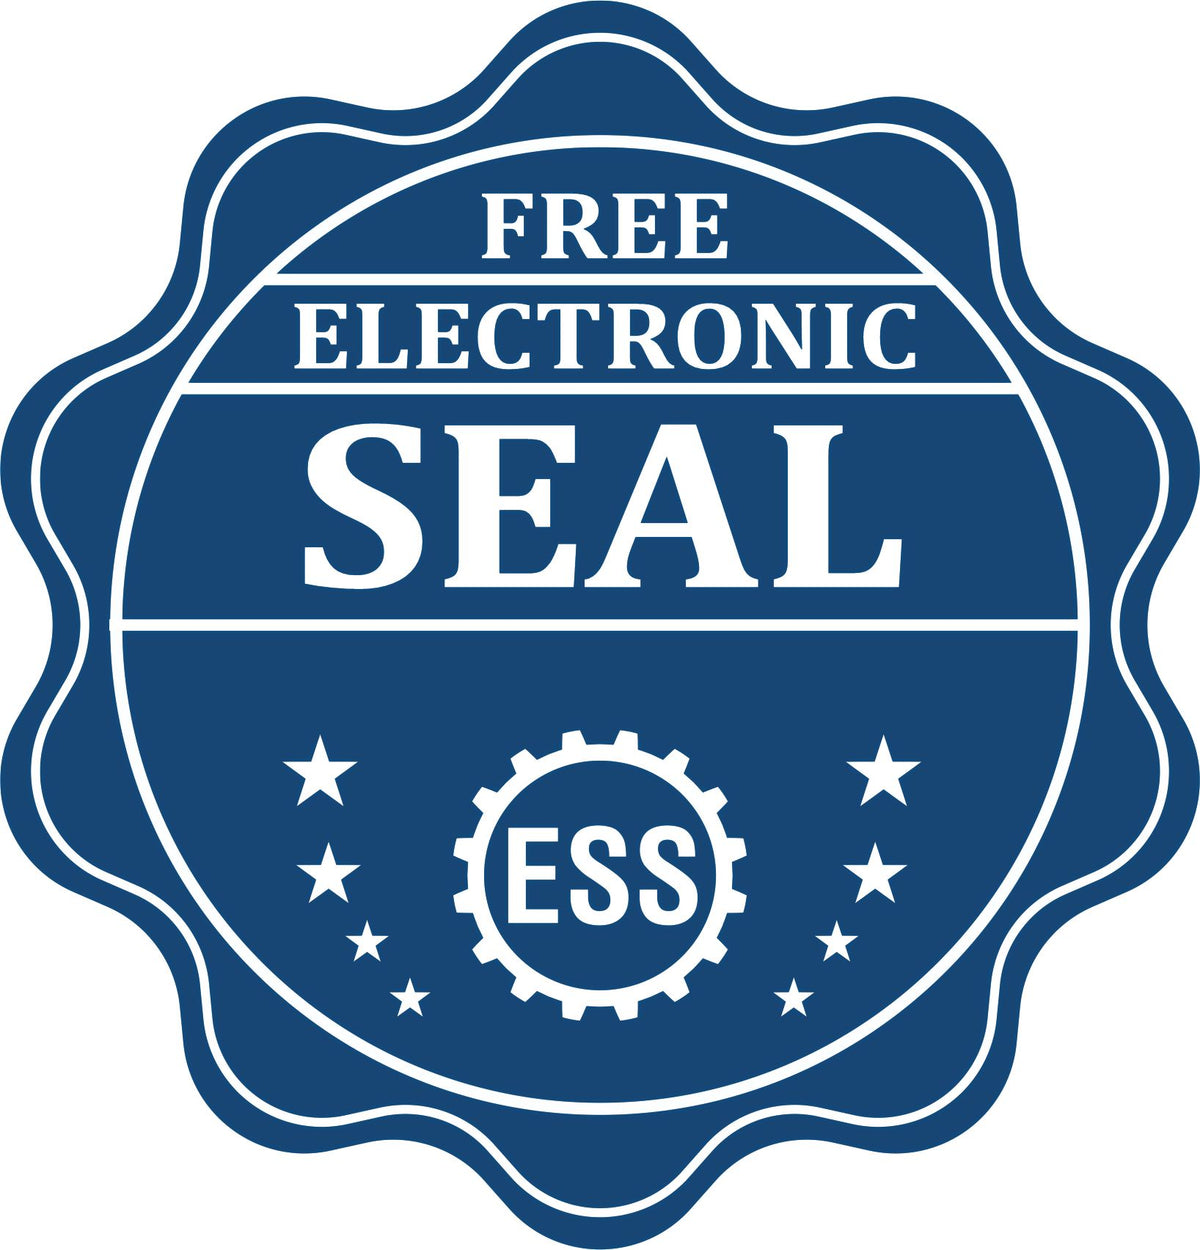 A badge showing a free electronic seal for the Indiana Professional Engineer Seal Stamp with stars and the ESS gear on the emblem.